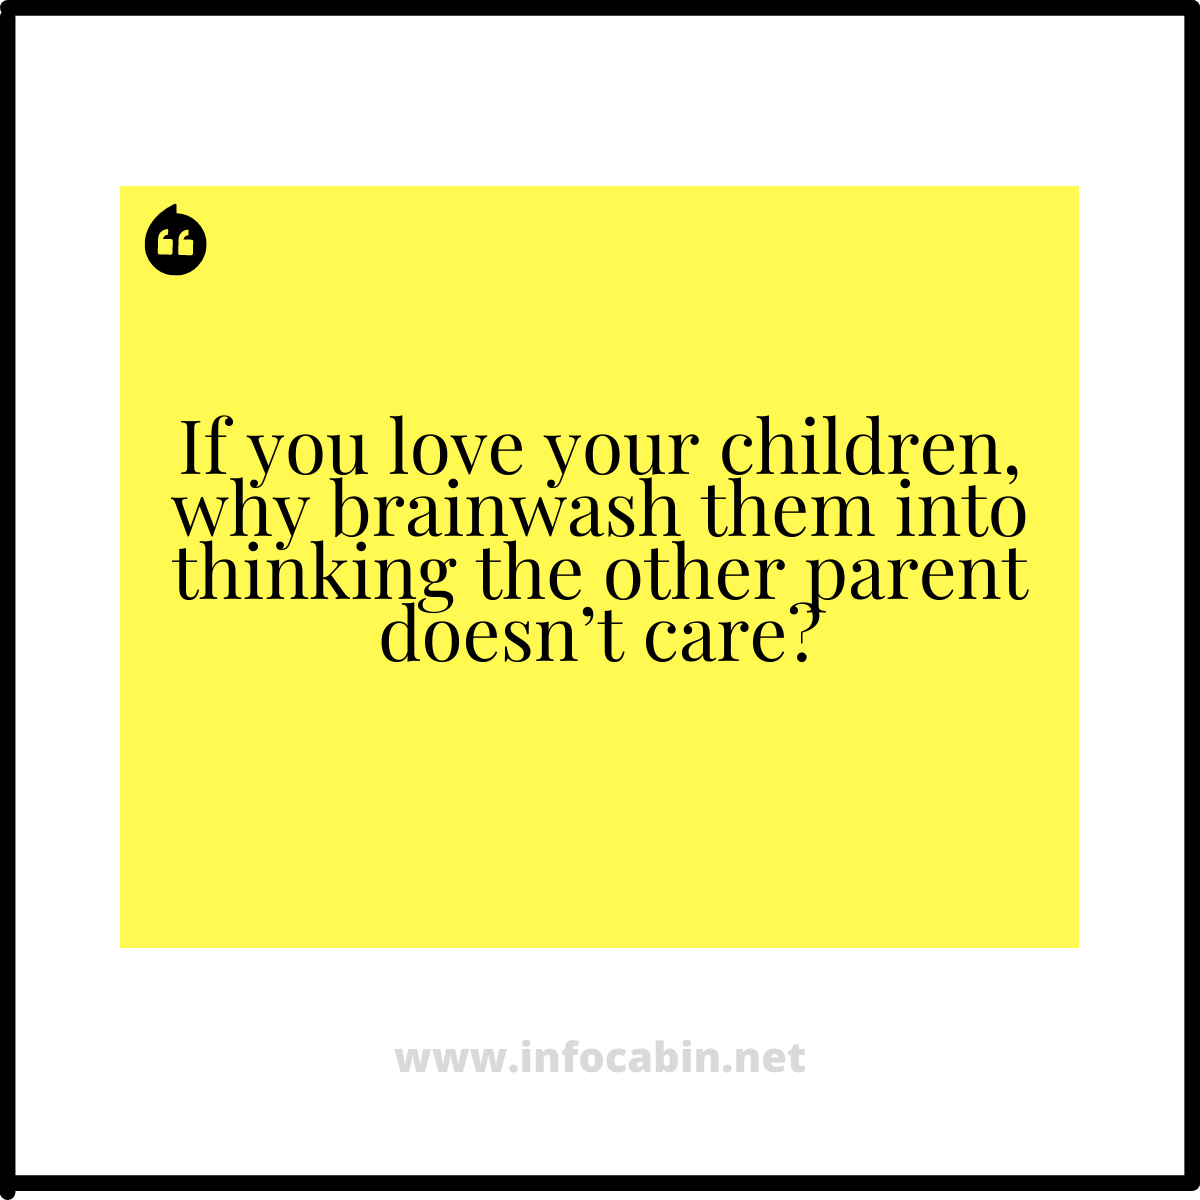 If you love your children, why brainwash them into thinking the other parent doesn’t care